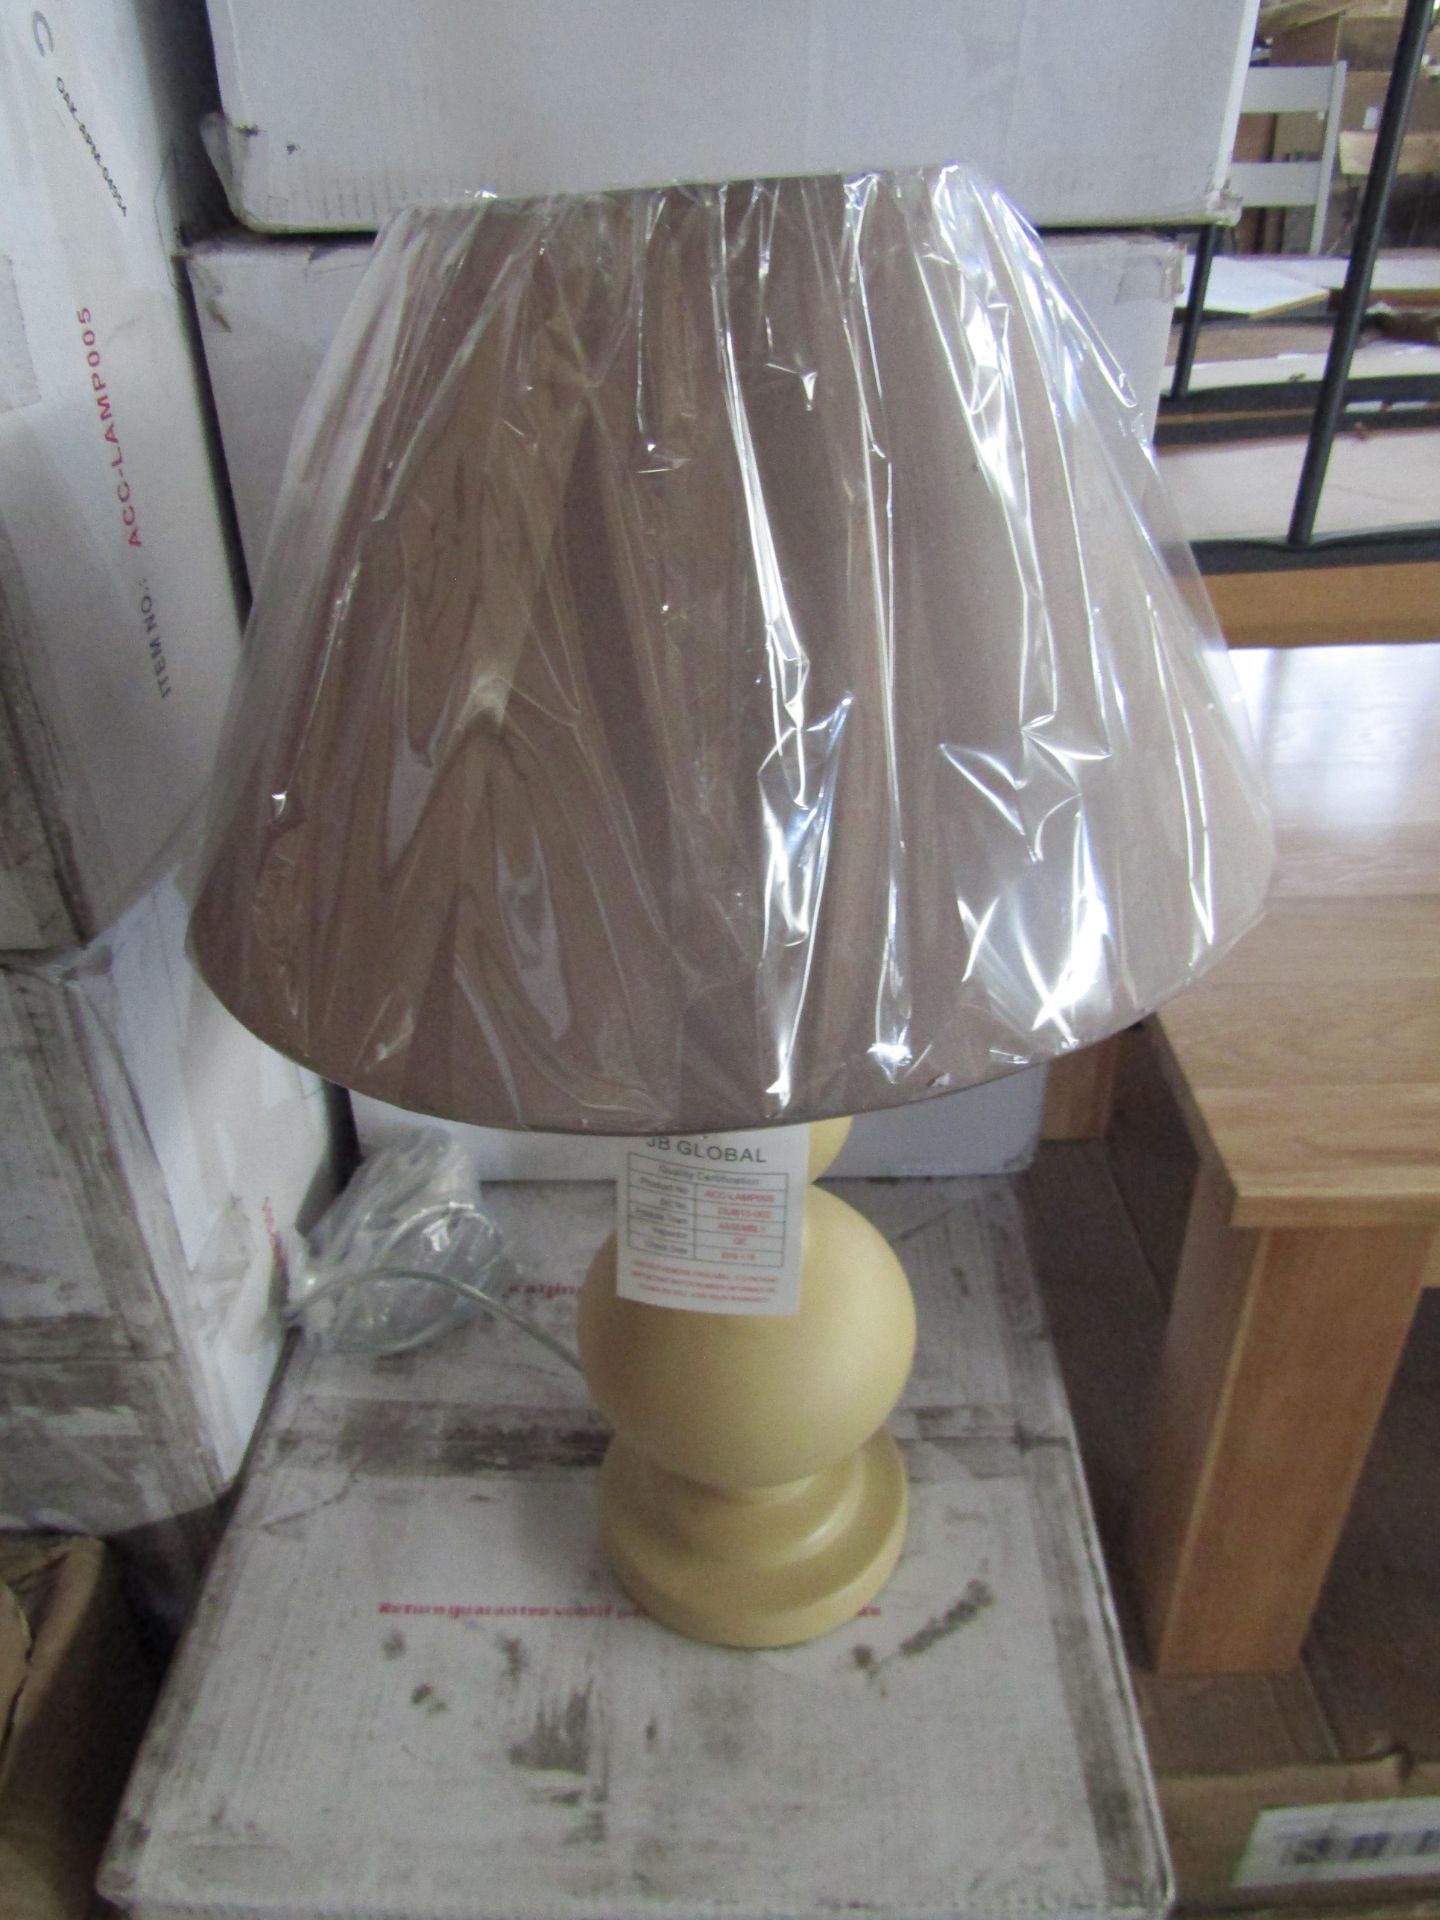 Oak Furnitureland Table Lamp 5 RRP 149.00 Making the most of light, This lamp features sphere-